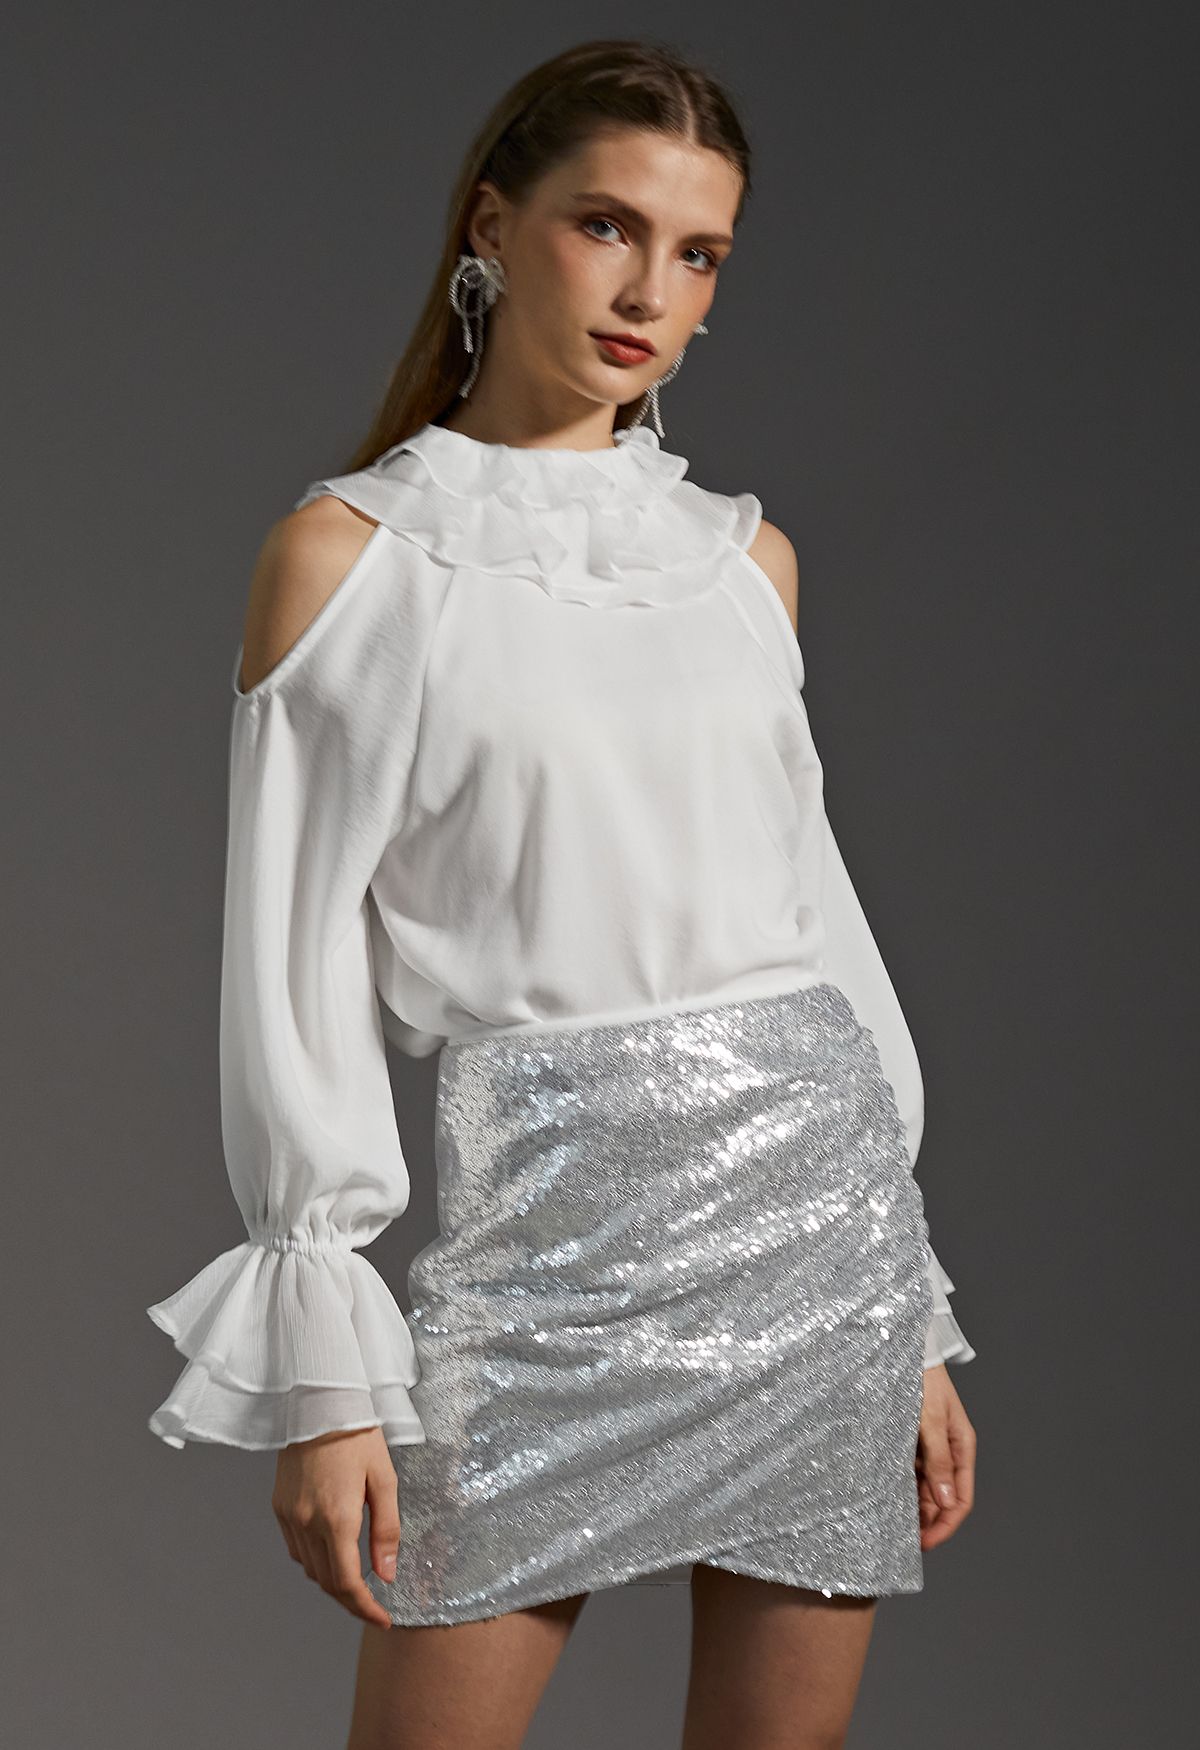 Sparkle Sequin Side Ruched Mini Bud Skirt in Silver